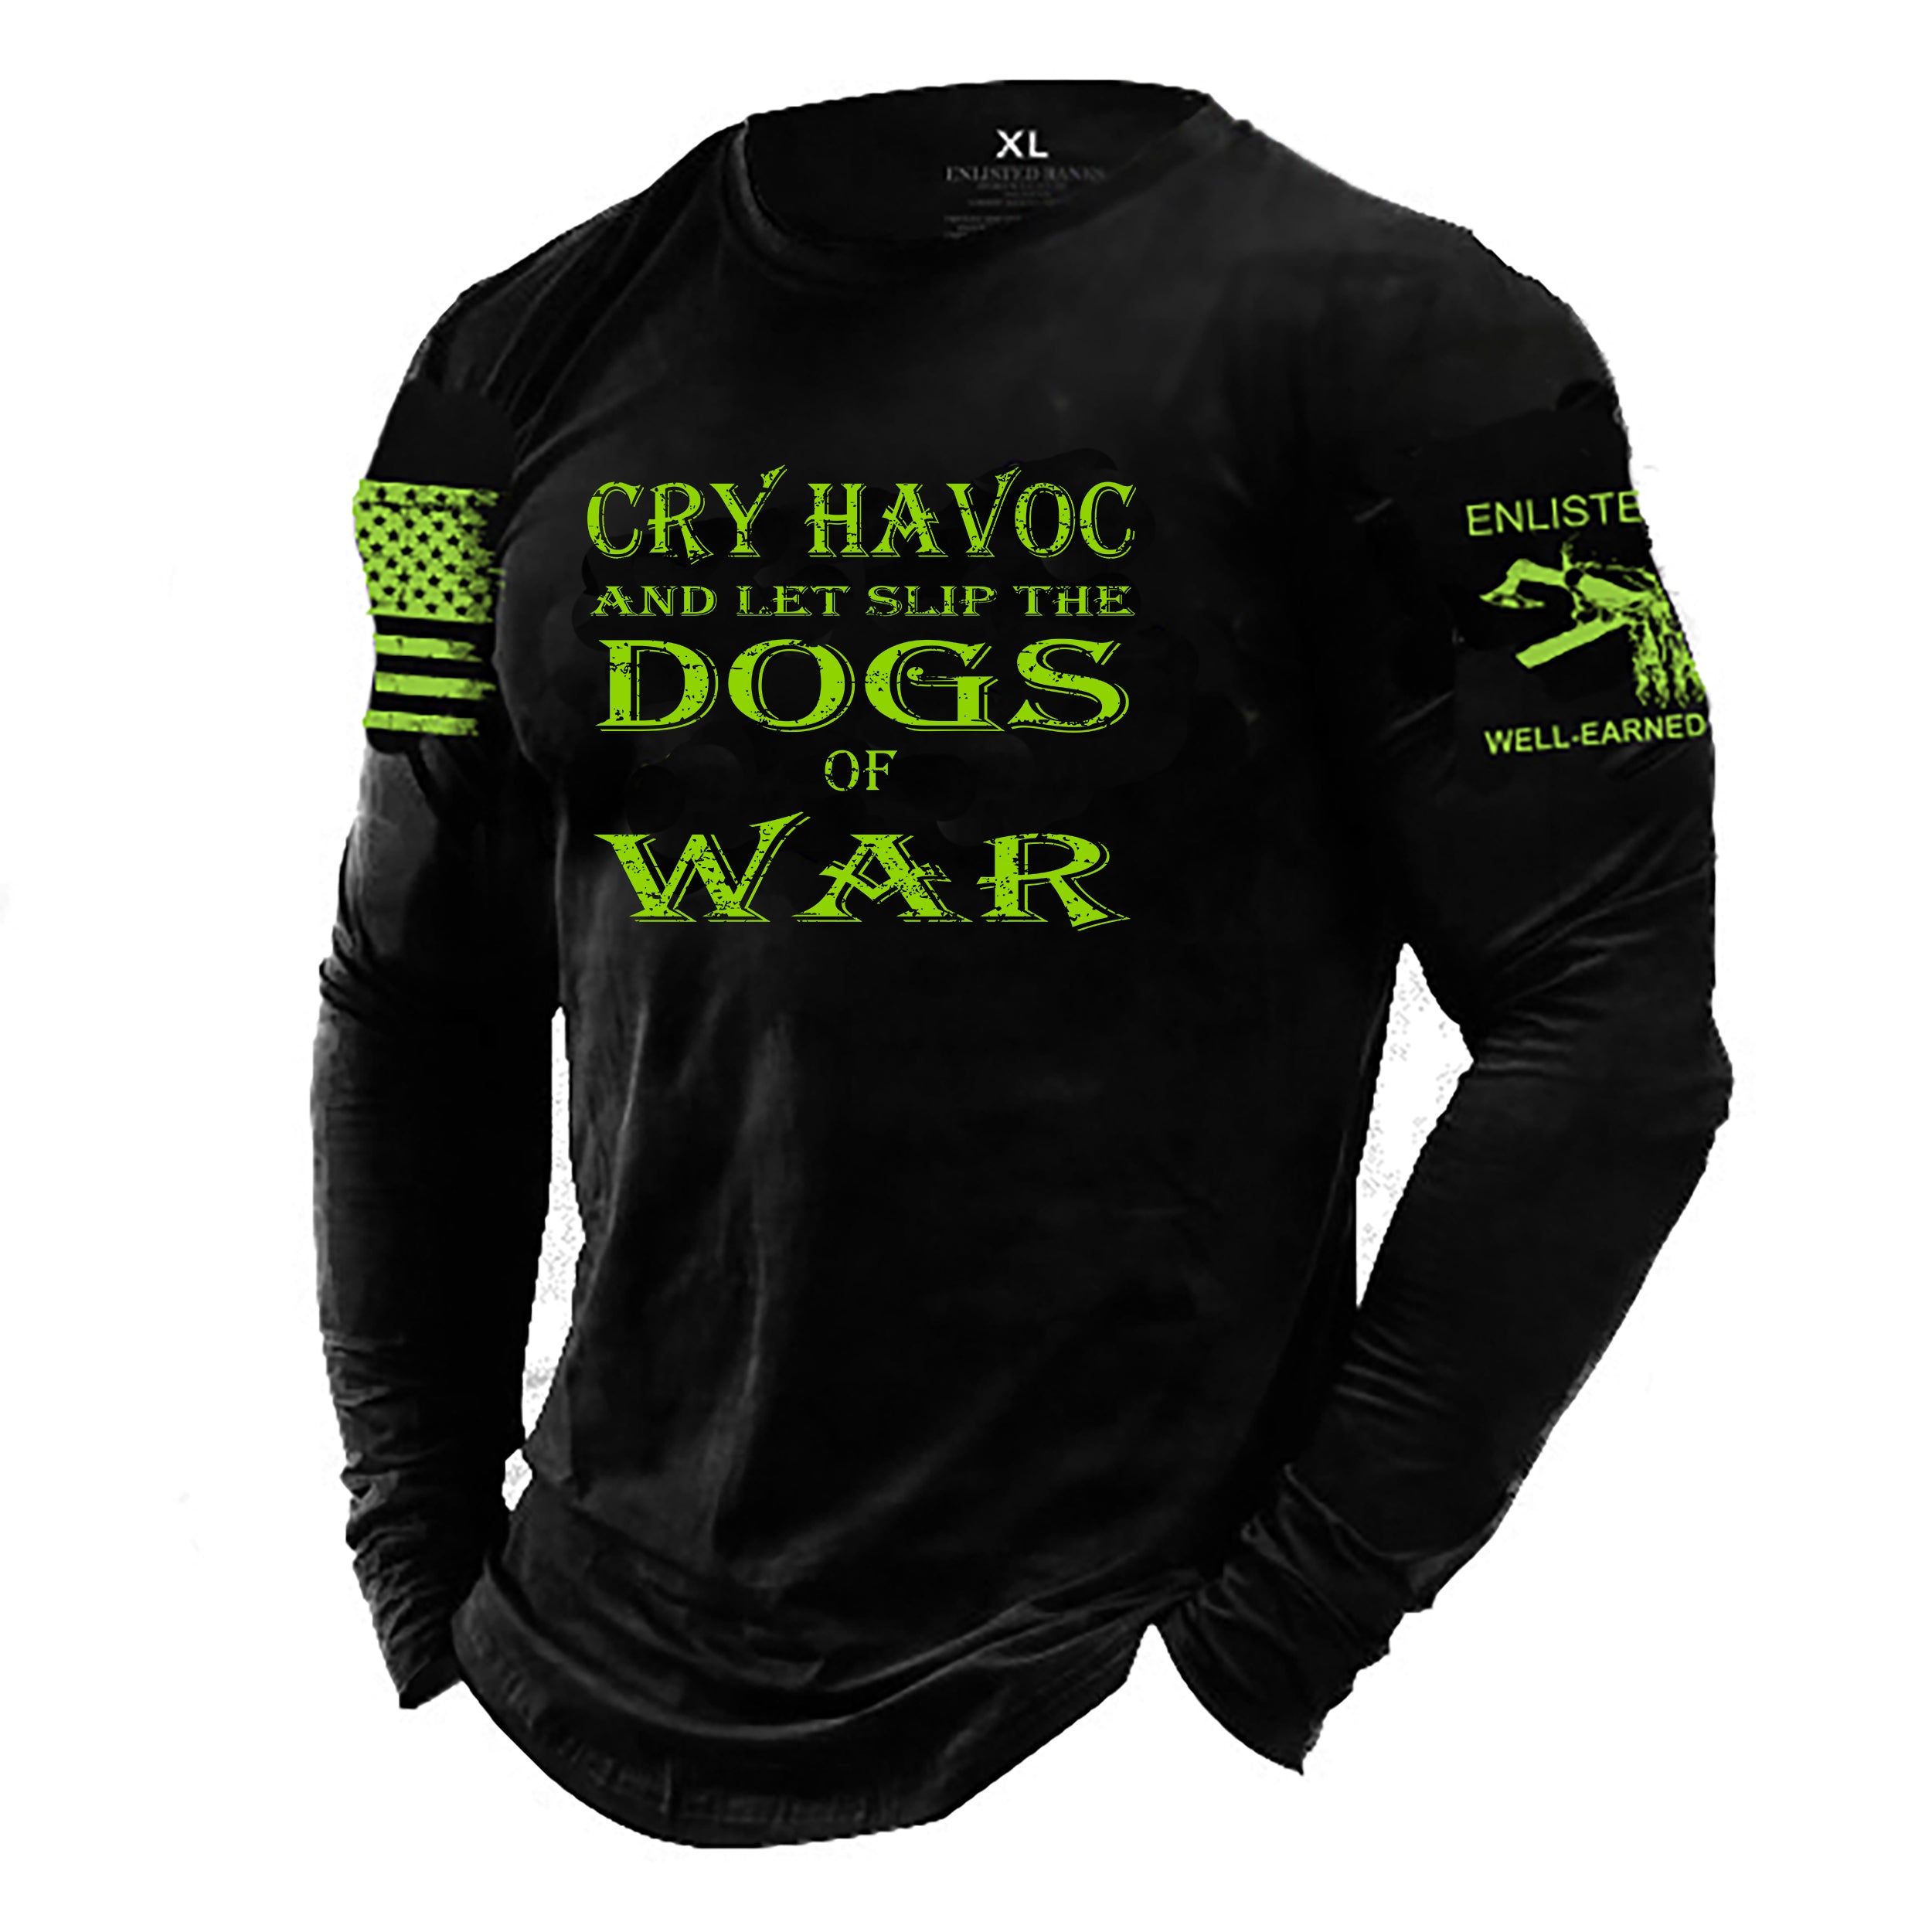 CRY HAVOC, Long Sleeve T-Shirt, Green Ink